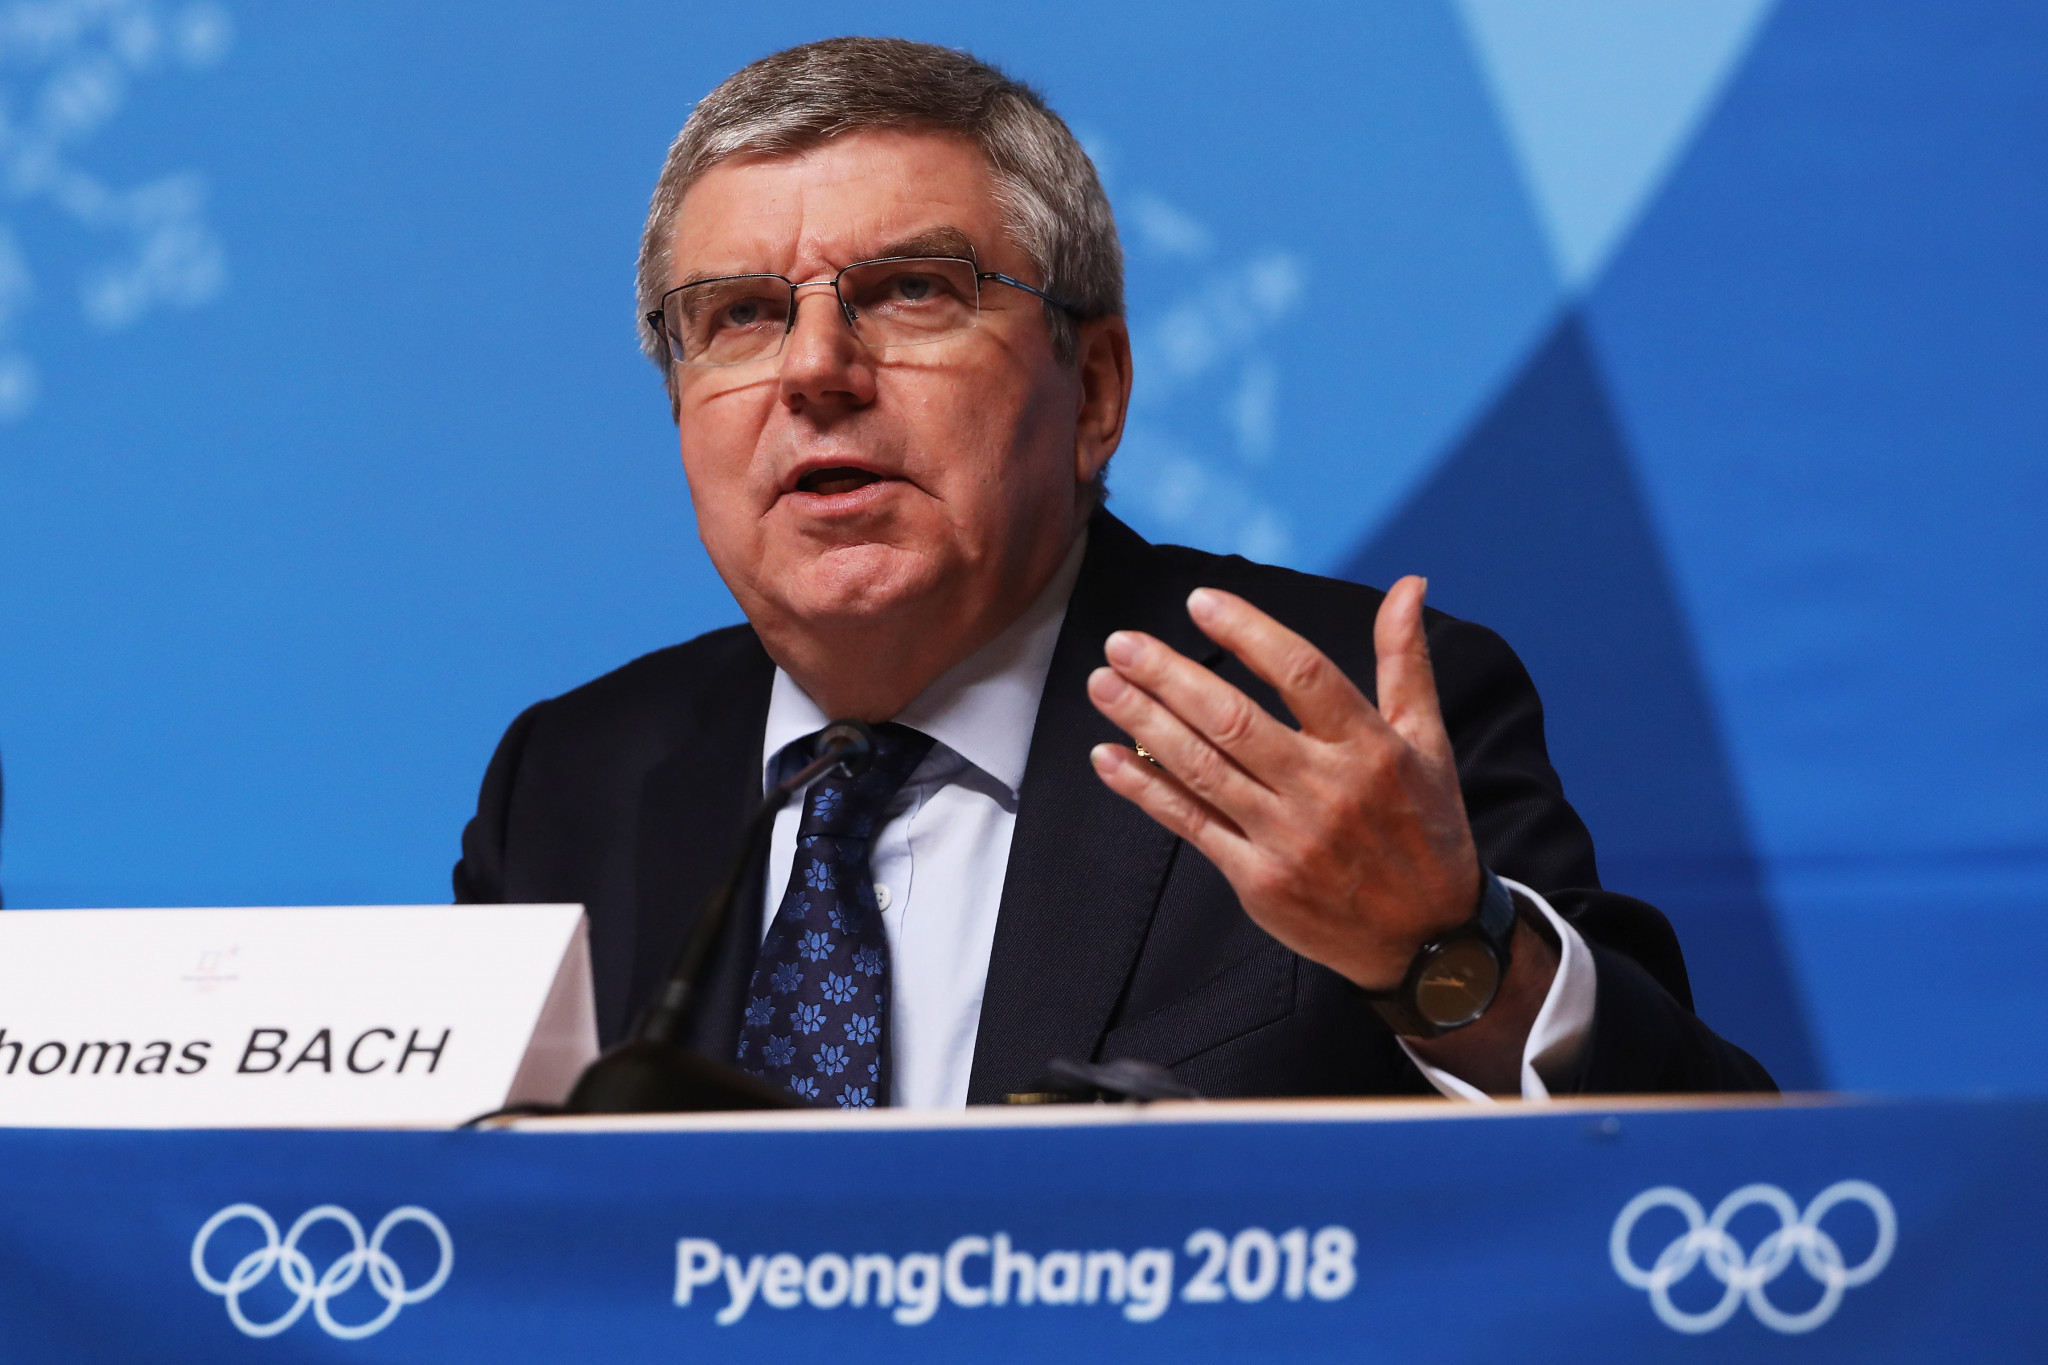 IOC do not rule out lifting Russian suspension even if more positive tests reported at Pyeongchang 2018